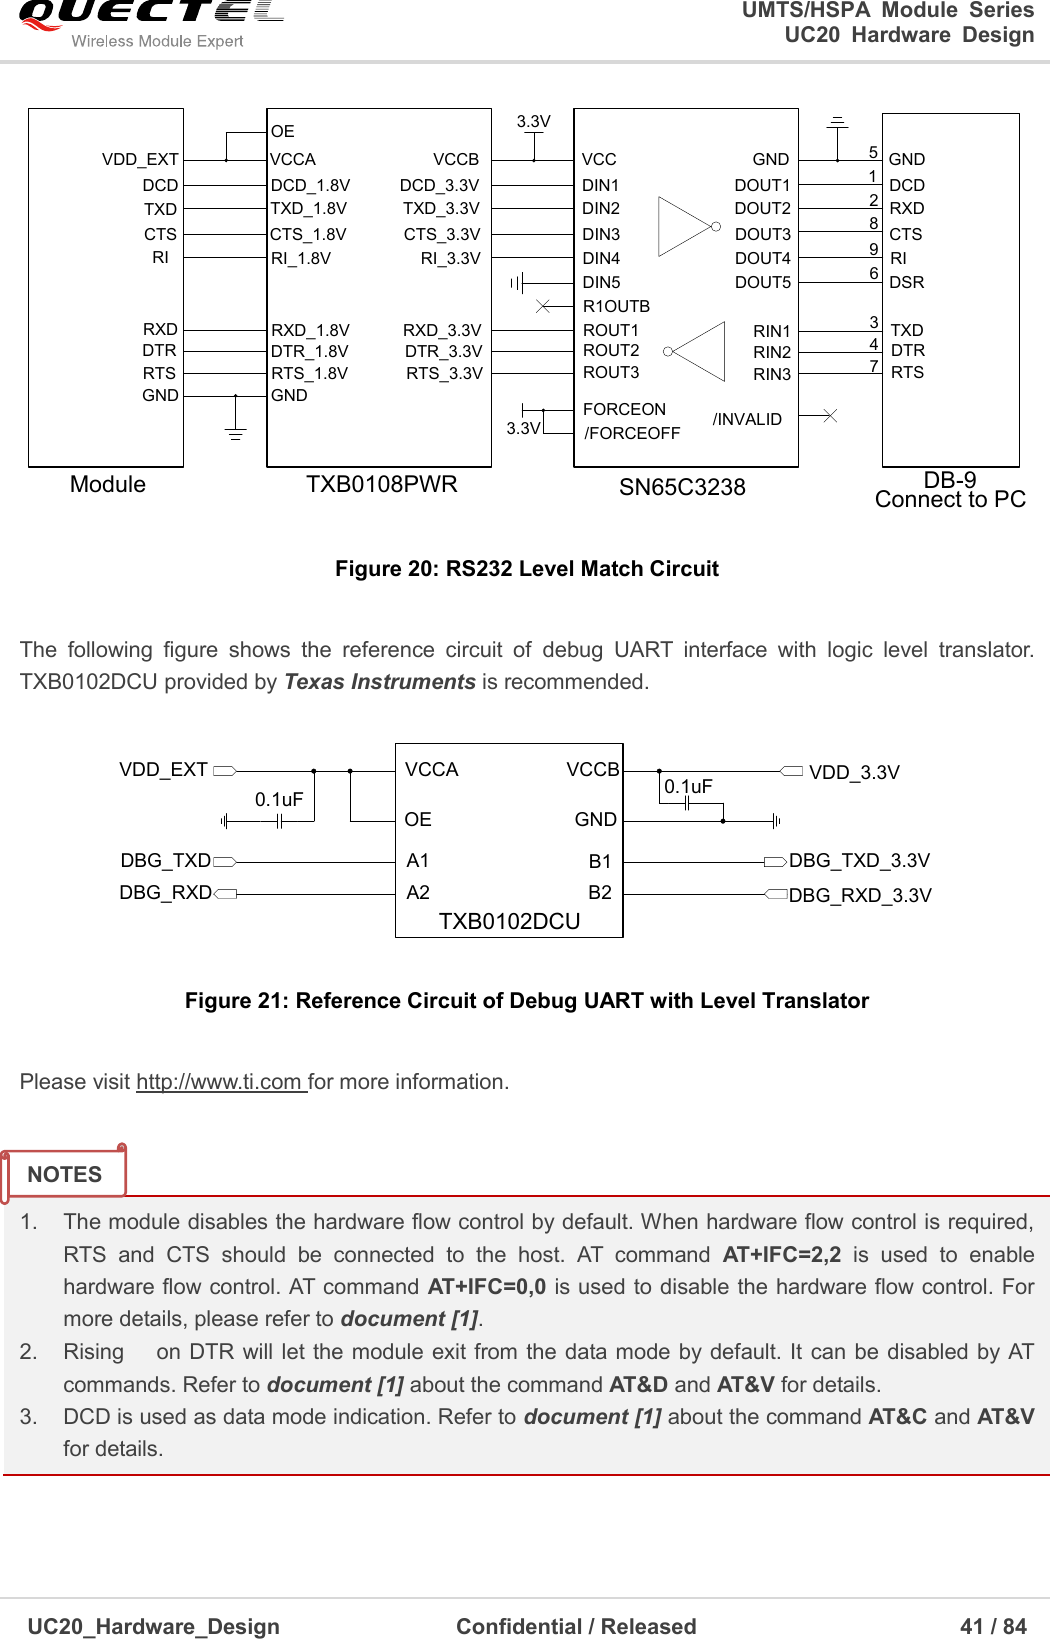                                                                                                                                               UMTS/HSPA  Module  Series                                                                 UC20  Hardware  Design  UC20_Hardware_Design                  Confidential / Released                            41 / 84     TXB0108PWRDCD_3.3VRTS_3.3VDTR_3.3VRXD_3.3VRI_3.3VCTS_3.3VTXD_3.3VDCDRTSDTRRXDRICTSTXDDCD_1.8VRTS_1.8VDTR_1.8VRXD_1.8VRI_1.8VCTS_1.8VTXD_1.8VVCCAModuleGND GNDVDD_EXT VCCB3.3VDIN1ROUT3ROUT2ROUT1DIN4DIN3DIN2DIN5R1OUTBFORCEON/FORCEOFF /INVALID3.3VDOUT1DOUT2DOUT3DOUT4DOUT5RIN3RIN2RIN1VCC GNDOESN65C3238 DB-9Connect to PCDCDRTSDTRTXDRICTSRXDDSRGND123456789 Figure 20: RS232 Level Match Circuit  The  following  figure  shows  the  reference  circuit  of  debug  UART  interface  with  logic  level  translator. TXB0102DCU provided by Texas Instruments is recommended. VCCA VCCBOEA1A2GNDB1B2VDD_EXTDBG_TXDDBG_RXD0.1uF 0.1uFDBG_TXD_3.3VDBG_RXD_3.3VVDD_3.3VTXB0102DCU Figure 21: Reference Circuit of Debug UART with Level Translator  Please visit http://www.ti.com for more information.   1.  The module disables the hardware flow control by default. When hardware flow control is required, RTS  and  CTS  should  be  connected  to  the  host.  AT  command  AT+IFC=2,2  is  used  to  enable hardware flow control. AT command AT+IFC=0,0 is used to disable the hardware flow control. For more details, please refer to document [1]. 2.  Rising      on  DTR will let the module exit from the data mode by default. It can be disabled by AT commands. Refer to document [1] about the command AT&amp;D and AT&amp;V for details. 3.  DCD is used as data mode indication. Refer to document [1] about the command AT&amp;C and AT&amp;V for details.  NOTES 